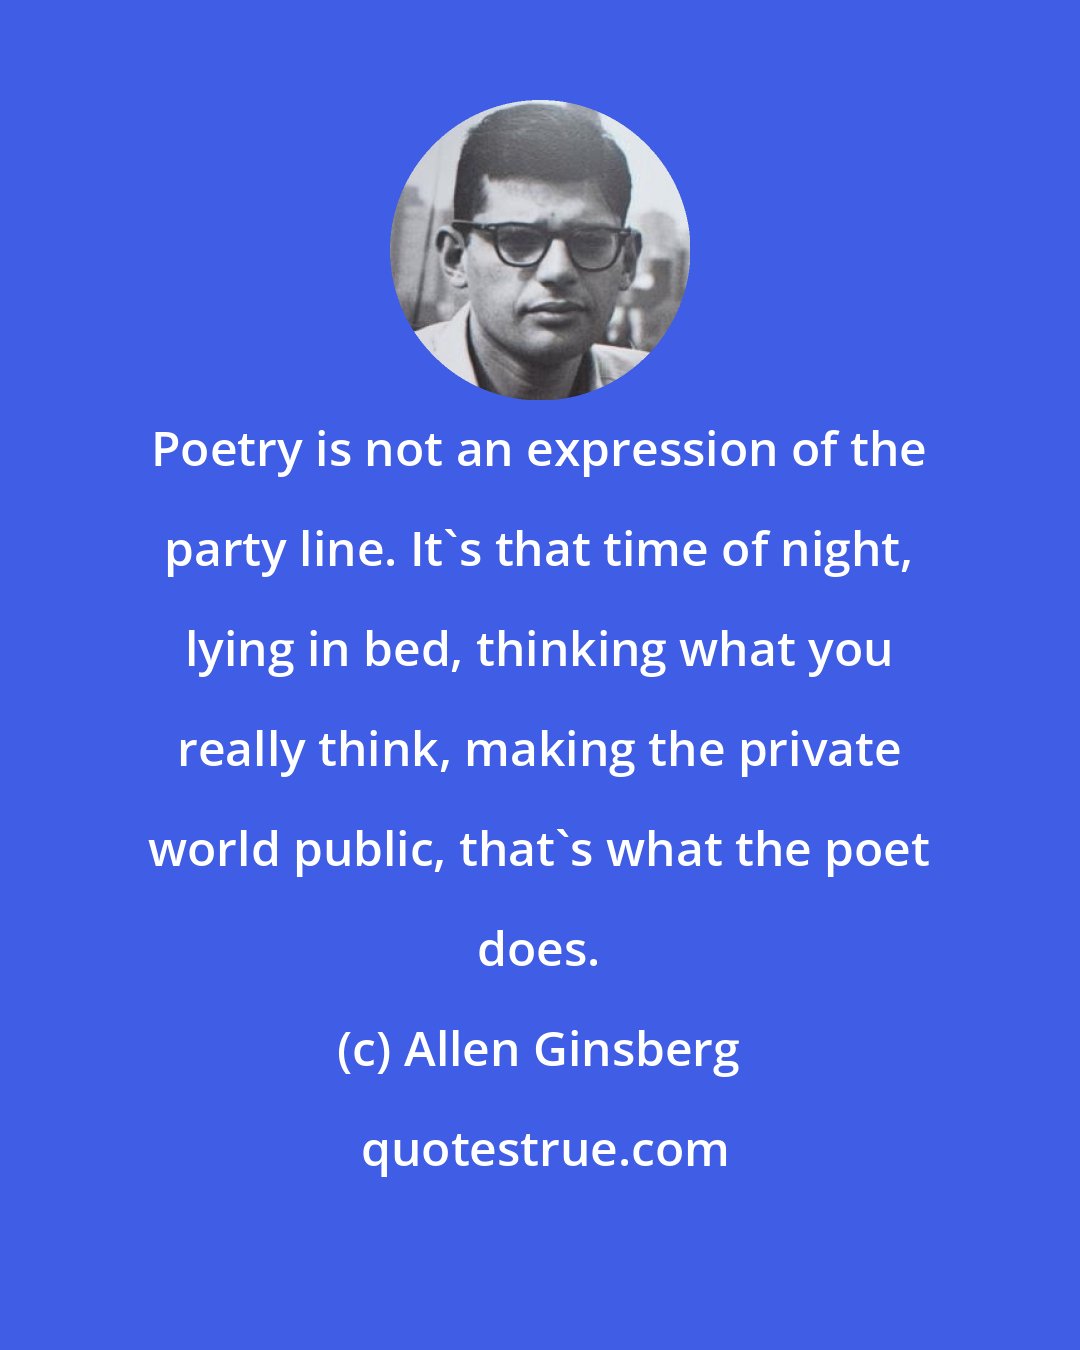 Allen Ginsberg: Poetry is not an expression of the party line. It's that time of night, lying in bed, thinking what you really think, making the private world public, that's what the poet does.